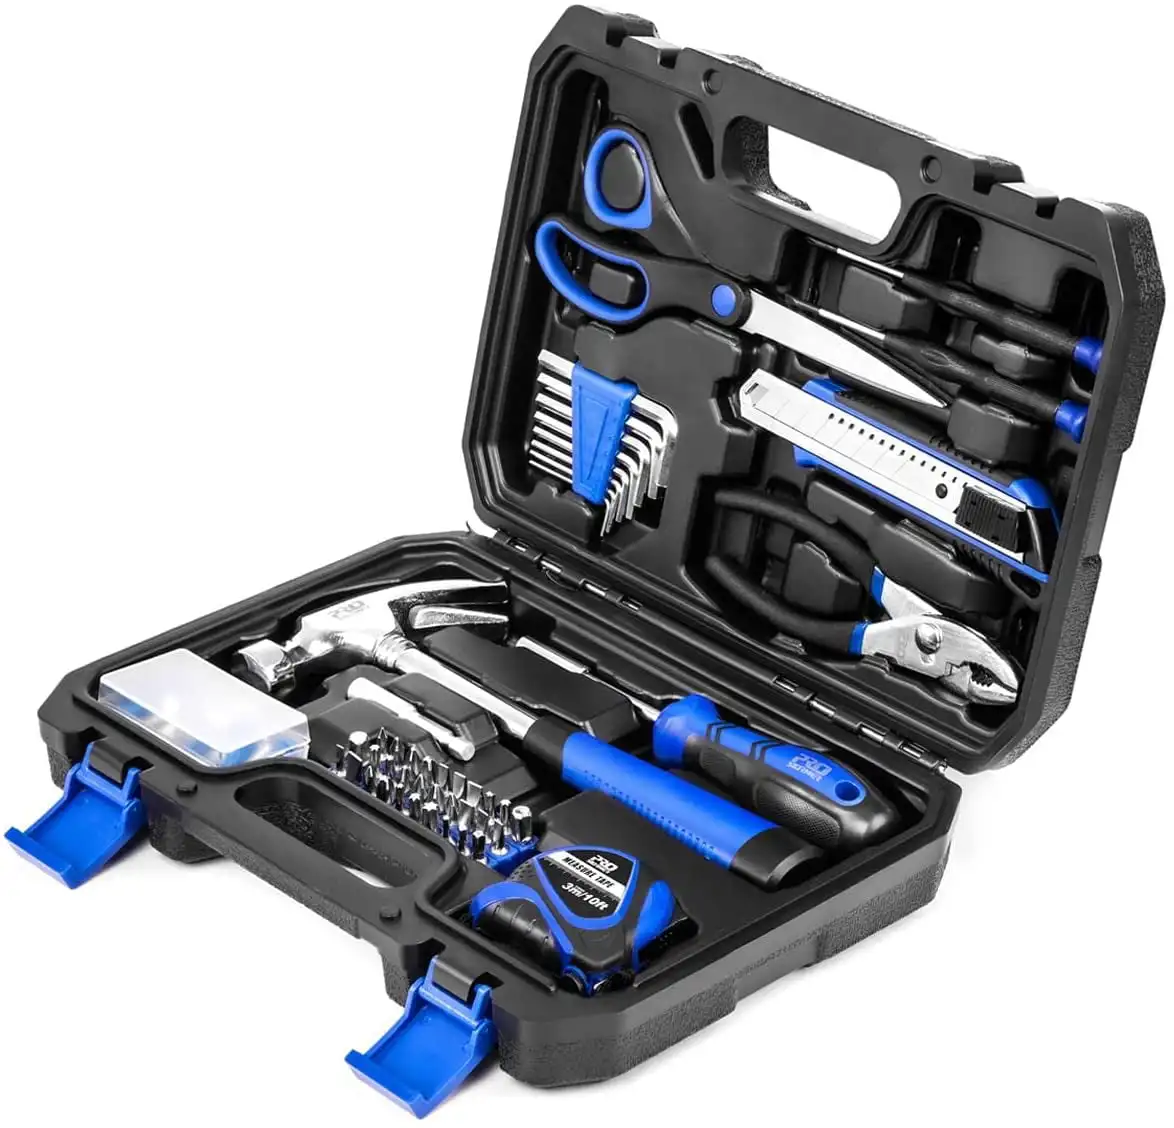 49-Piece Small Home Tool Kit,  General Household Repair Tool Set with Tool Box Storage Case - Great Gift for Beginners